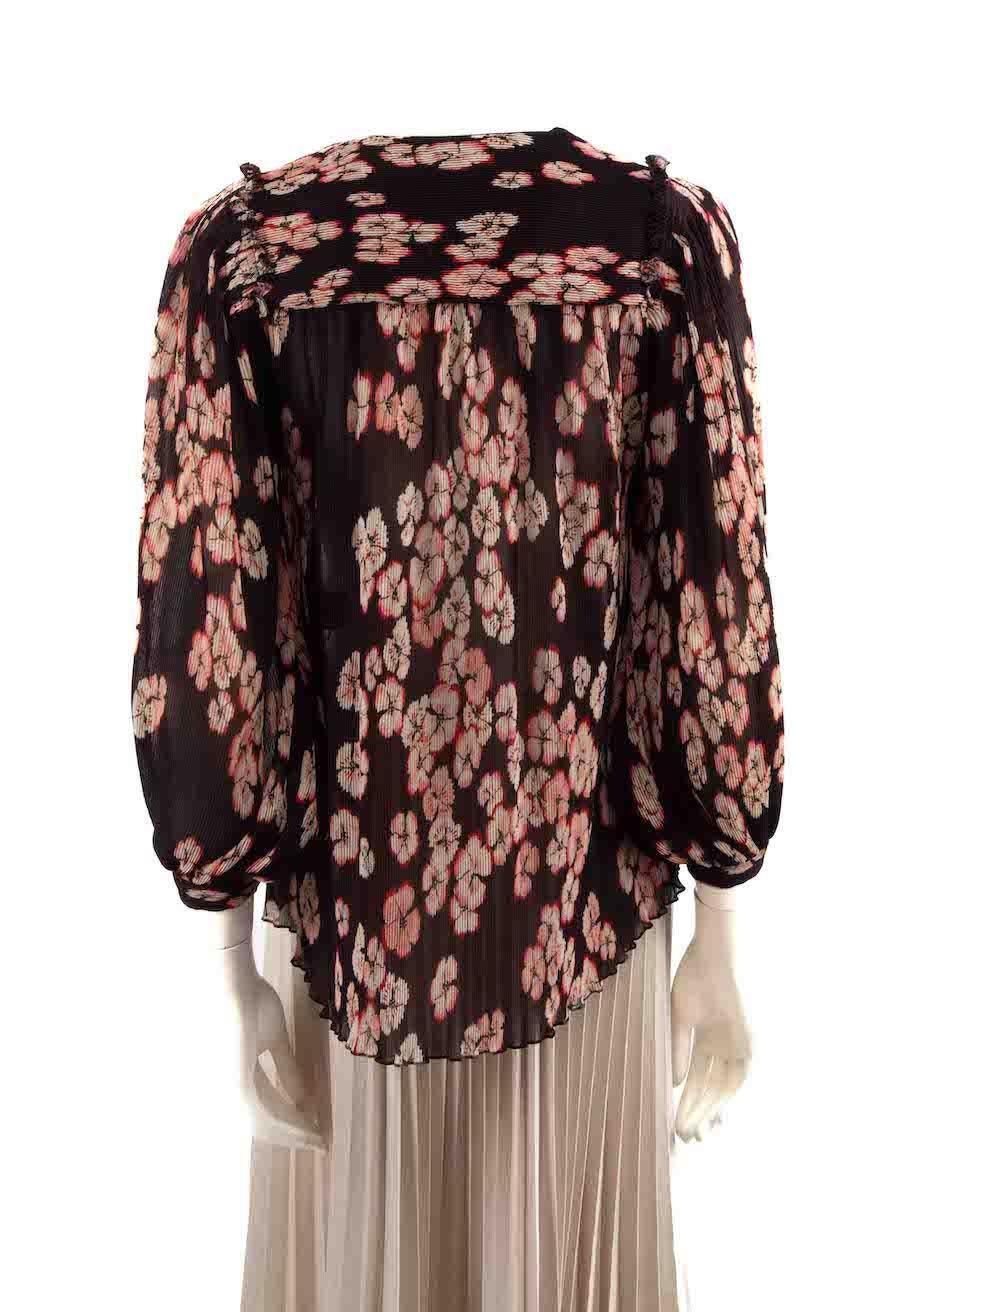 Isabel Marant Floral Pattern Mini Pleated Blouse Size S In Good Condition For Sale In London, GB